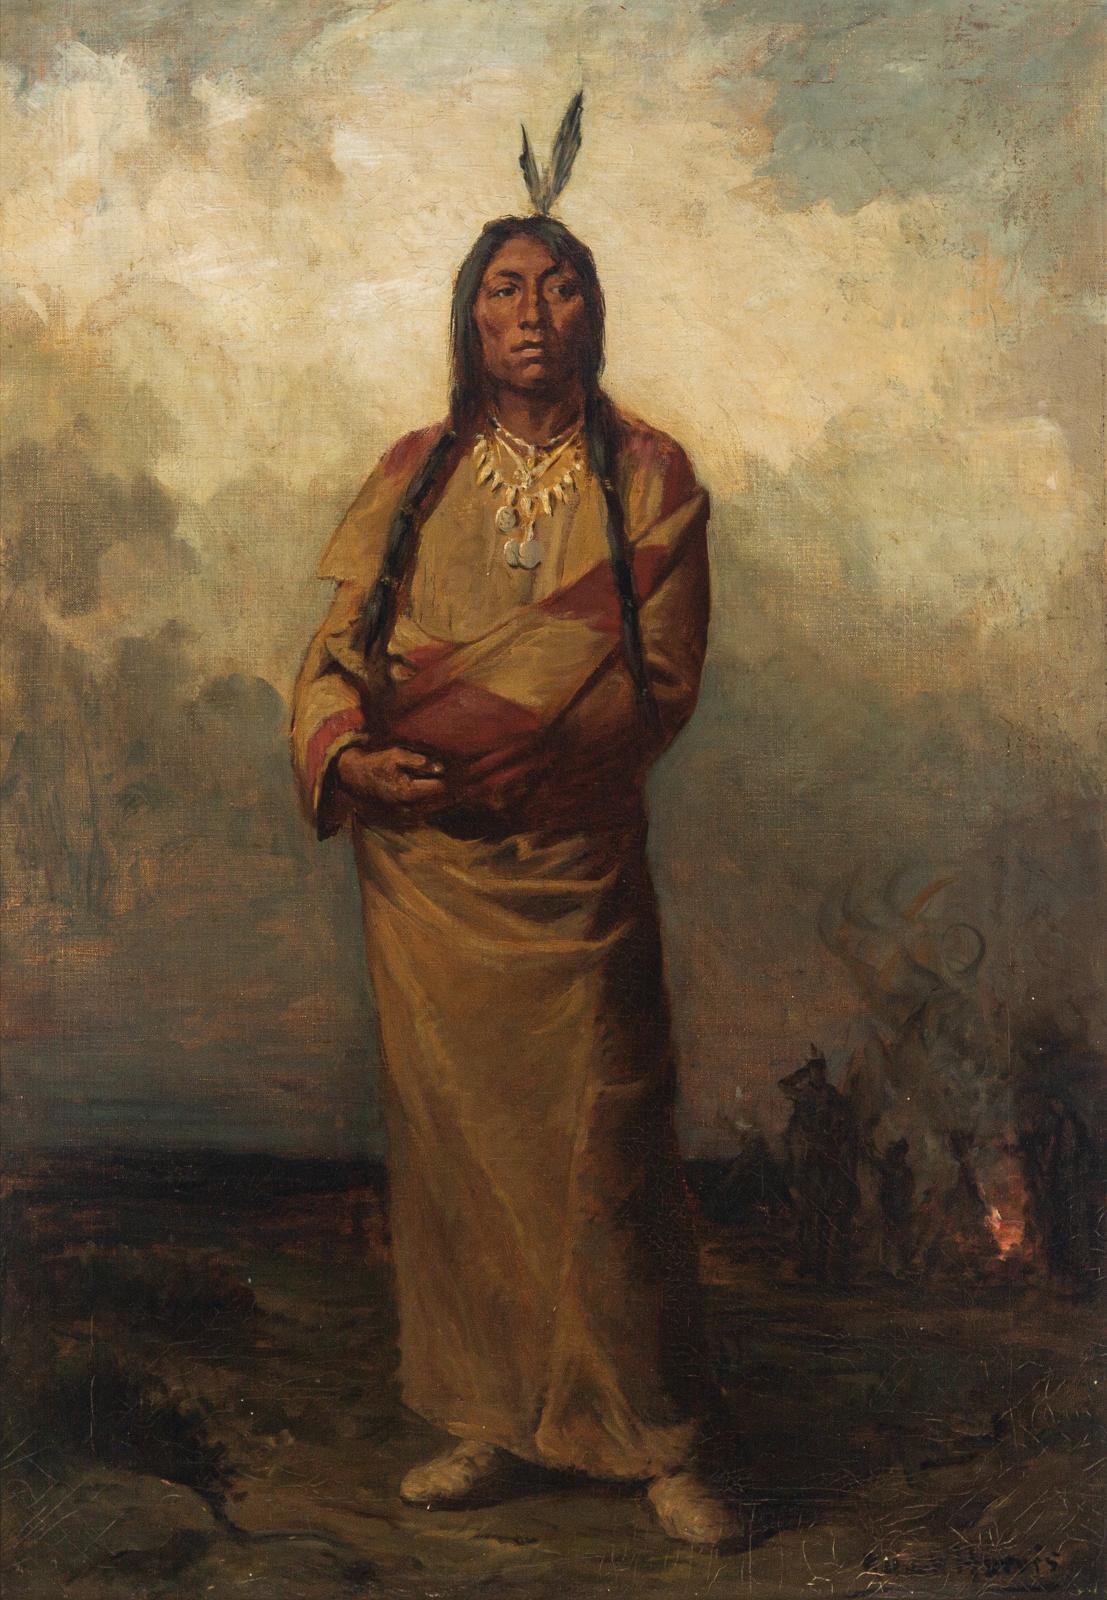 Robert Harris (1849-1919) - Indian Chief Of The North West, Canada